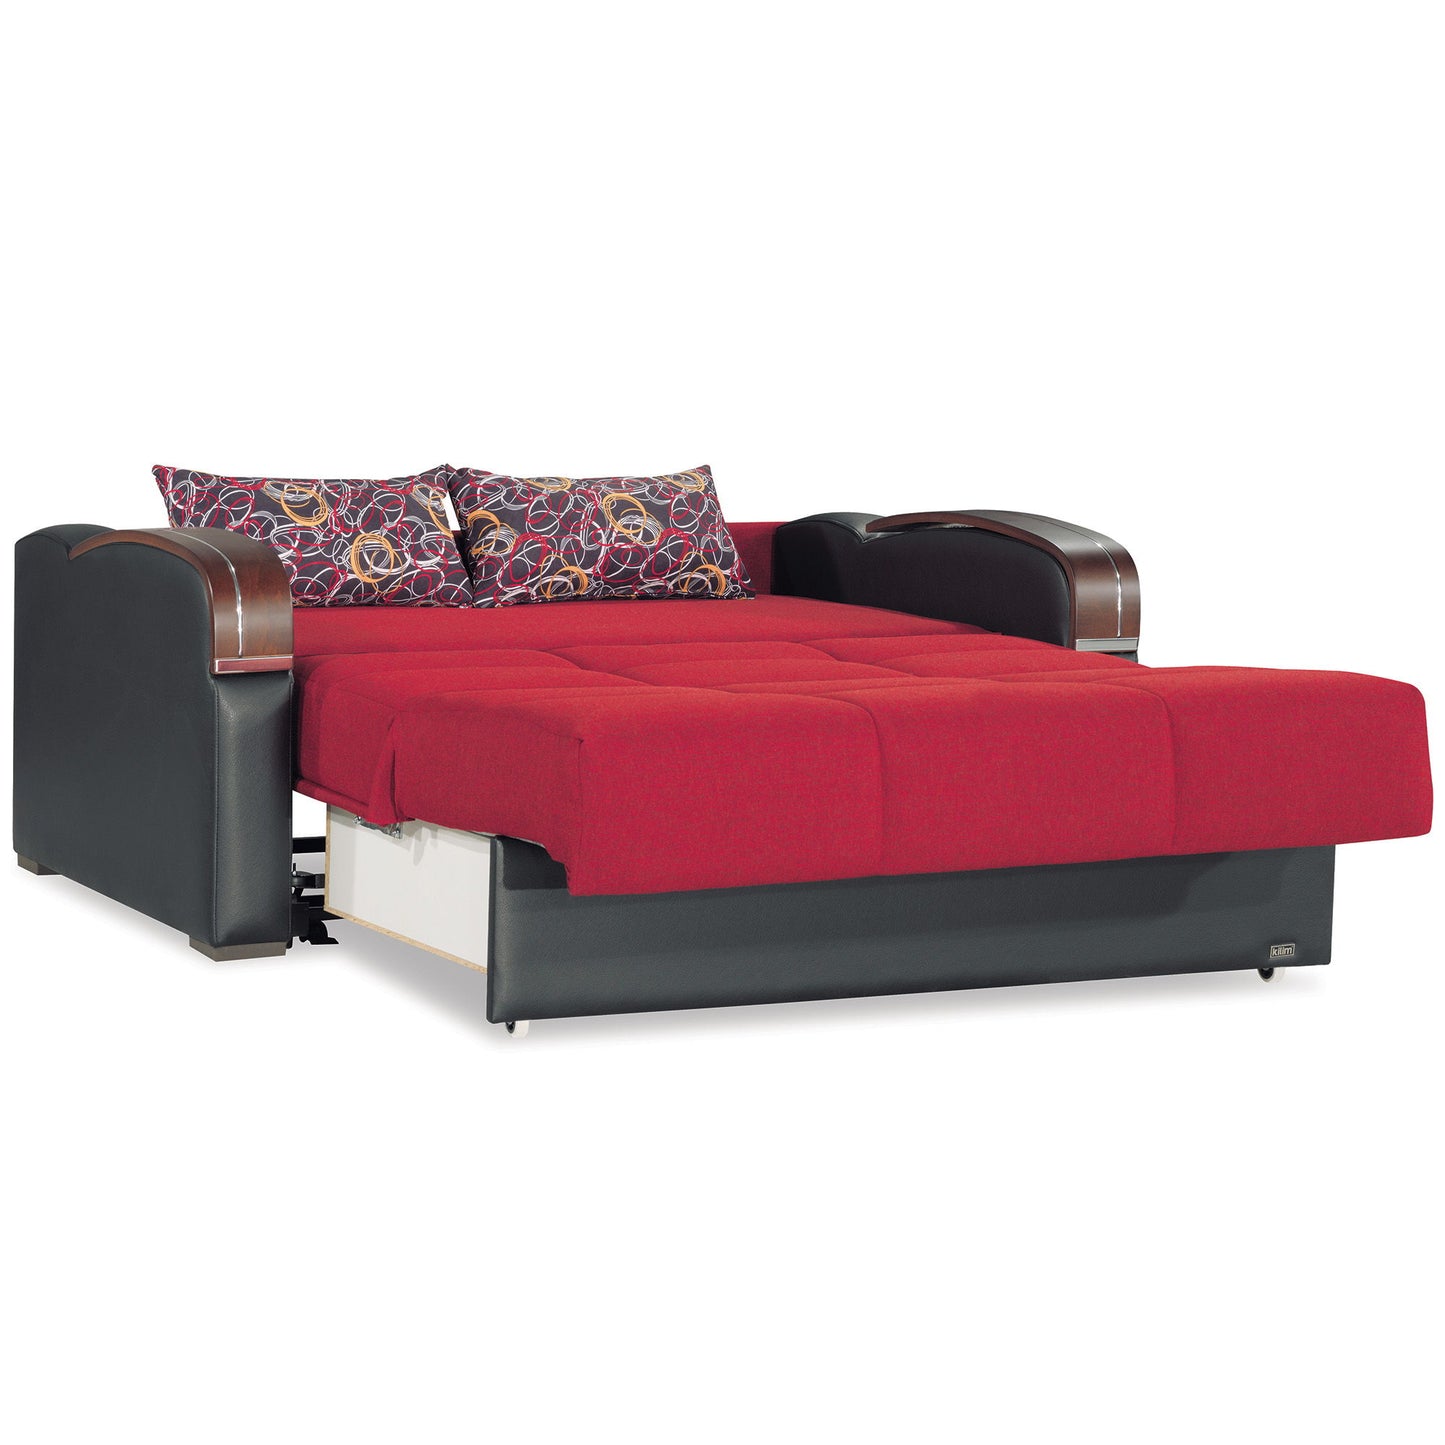 Ottomanson Snooze - Convertible Loveseat With Storage